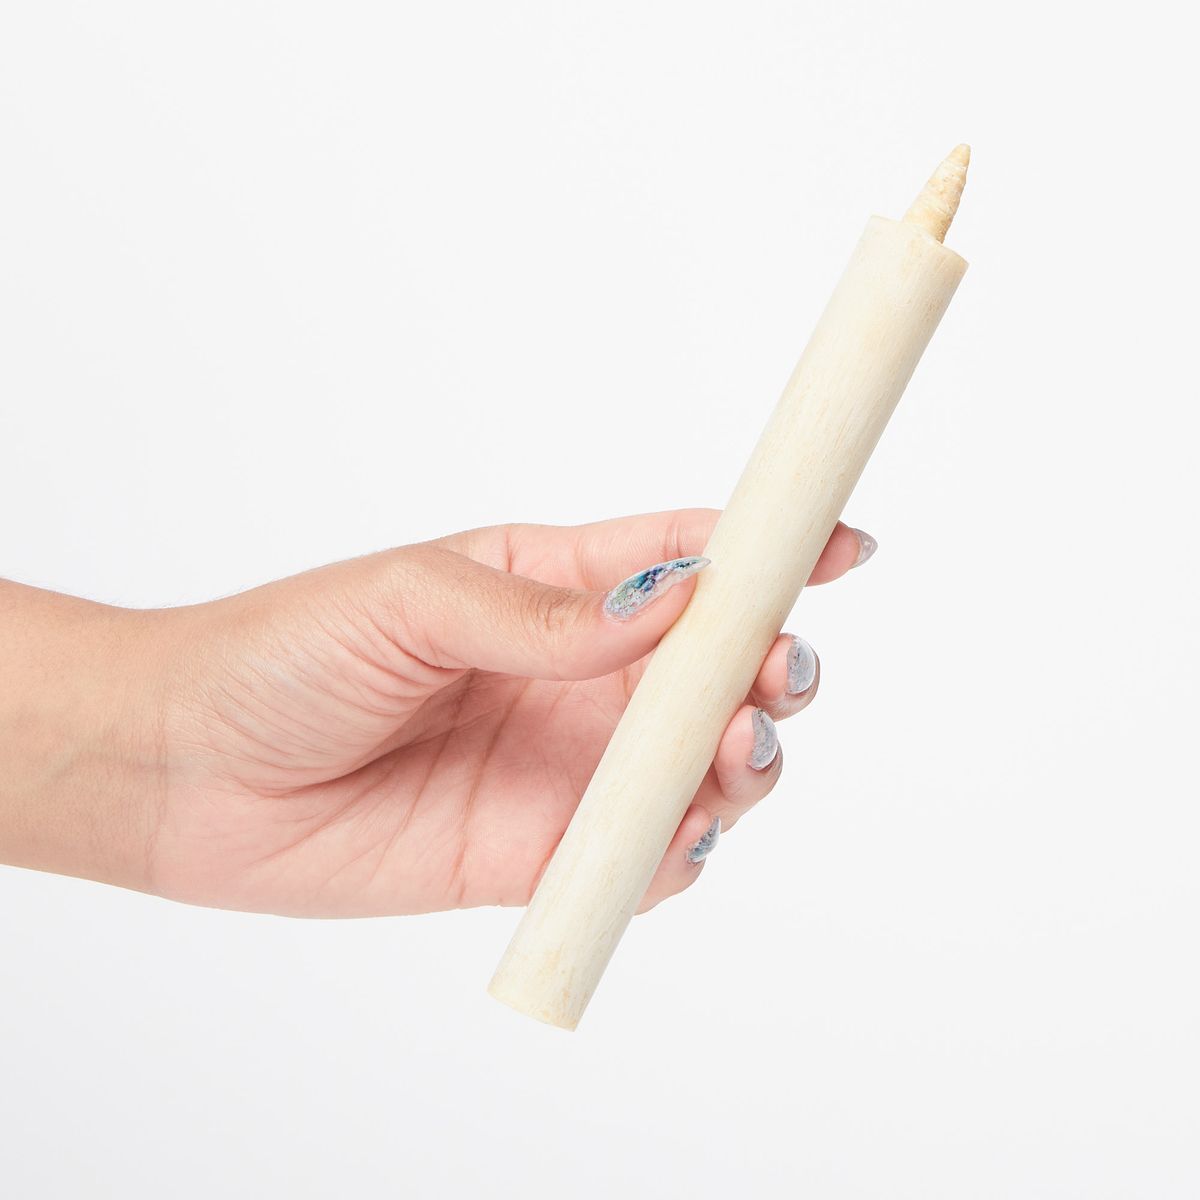 Hand holding an unlit cream colored taper candle at a slight angle